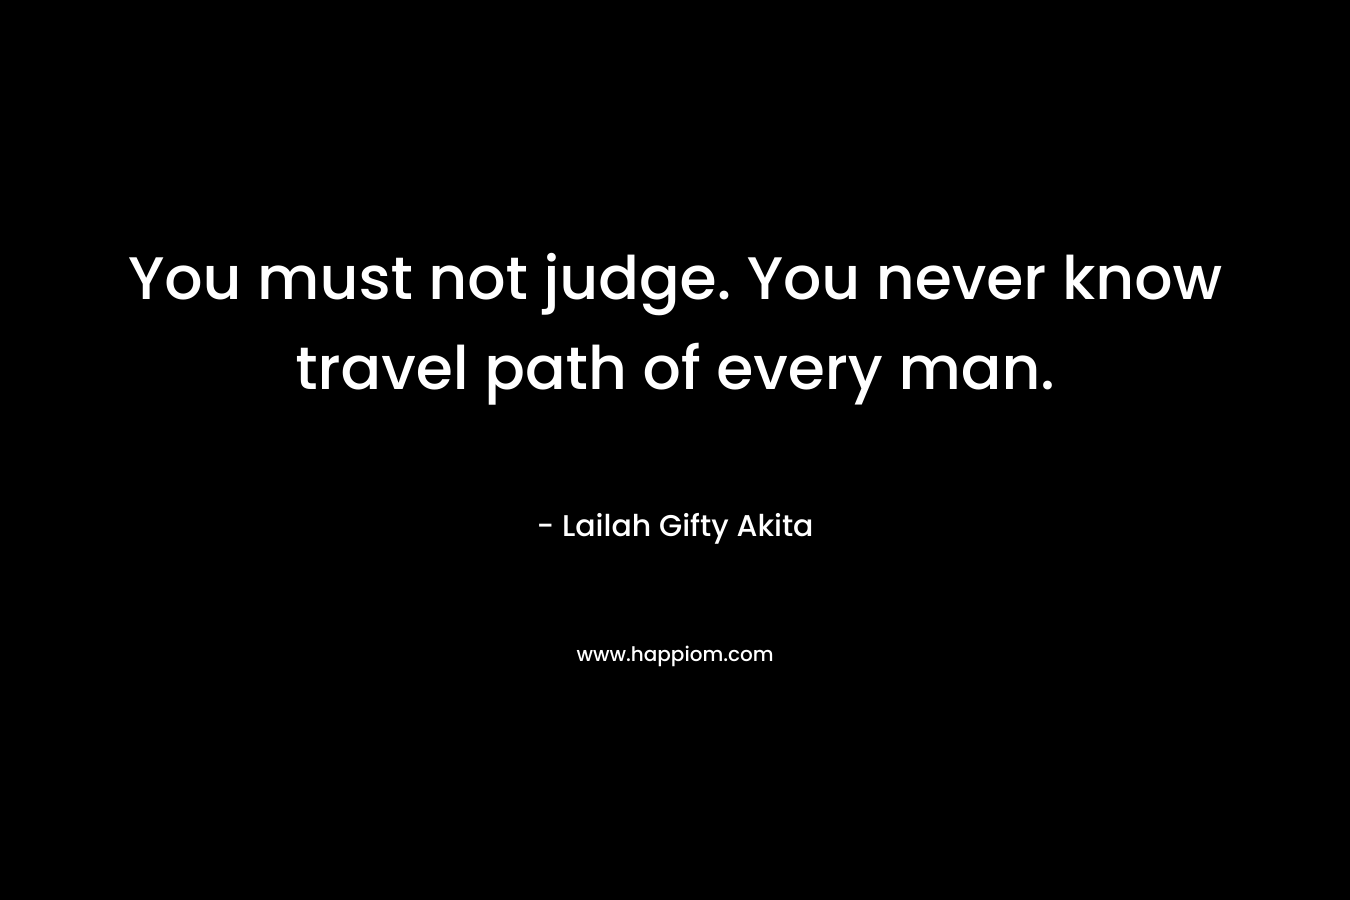 You must not judge. You never know travel path of every man.